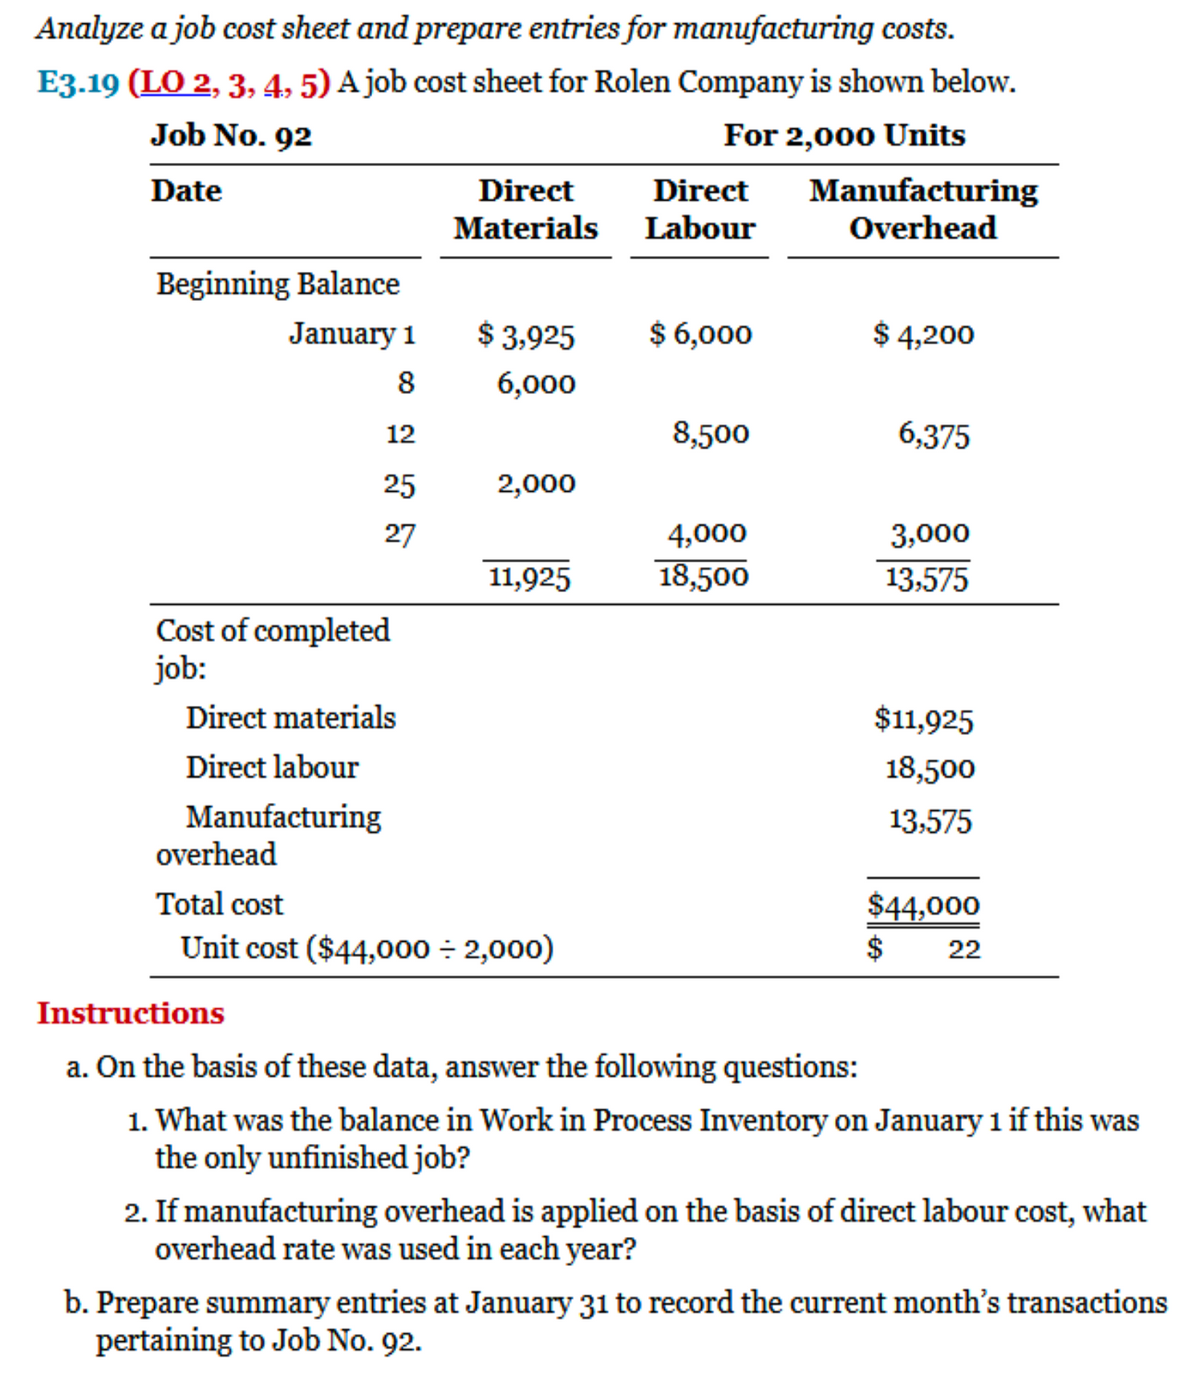 Analyze a job cost sheet and prepare entries for manufacturing costs.
E3.19 (LO 2, 3, 4, 5) A job cost sheet for Rolen Company is shown below.
Job No. 92
For 2,000 Units
Date
Direct
Direct
Labour
Manufacturing
Overhead
Materials
Beginning Balance
January 1
$ 3,925
$ 6,000
$ 4,200
8
6,000
8,500
6,375
2,000
4,000
3,000
11,925
18,500
13,575
Cost of completed
job:
Direct materials
$11,925
Direct labour
18,500
Manufacturing
13,575
overhead
Total cost
$44,000
Unit cost ($44,000 = 2,000)
22
Instructions
a. On the basis of these data, answer the following questions:
1. What was the balance in Work in Process Inventory on January 1 if this was
the only unfinished job?
2. If manufacturing overhead is applied on the basis of direct labour cost, what
overhead rate was used in each year?
b. Prepare summary entries at January 31 to record the current month's transactions
pertaining to Job No. 92.
12
25
27